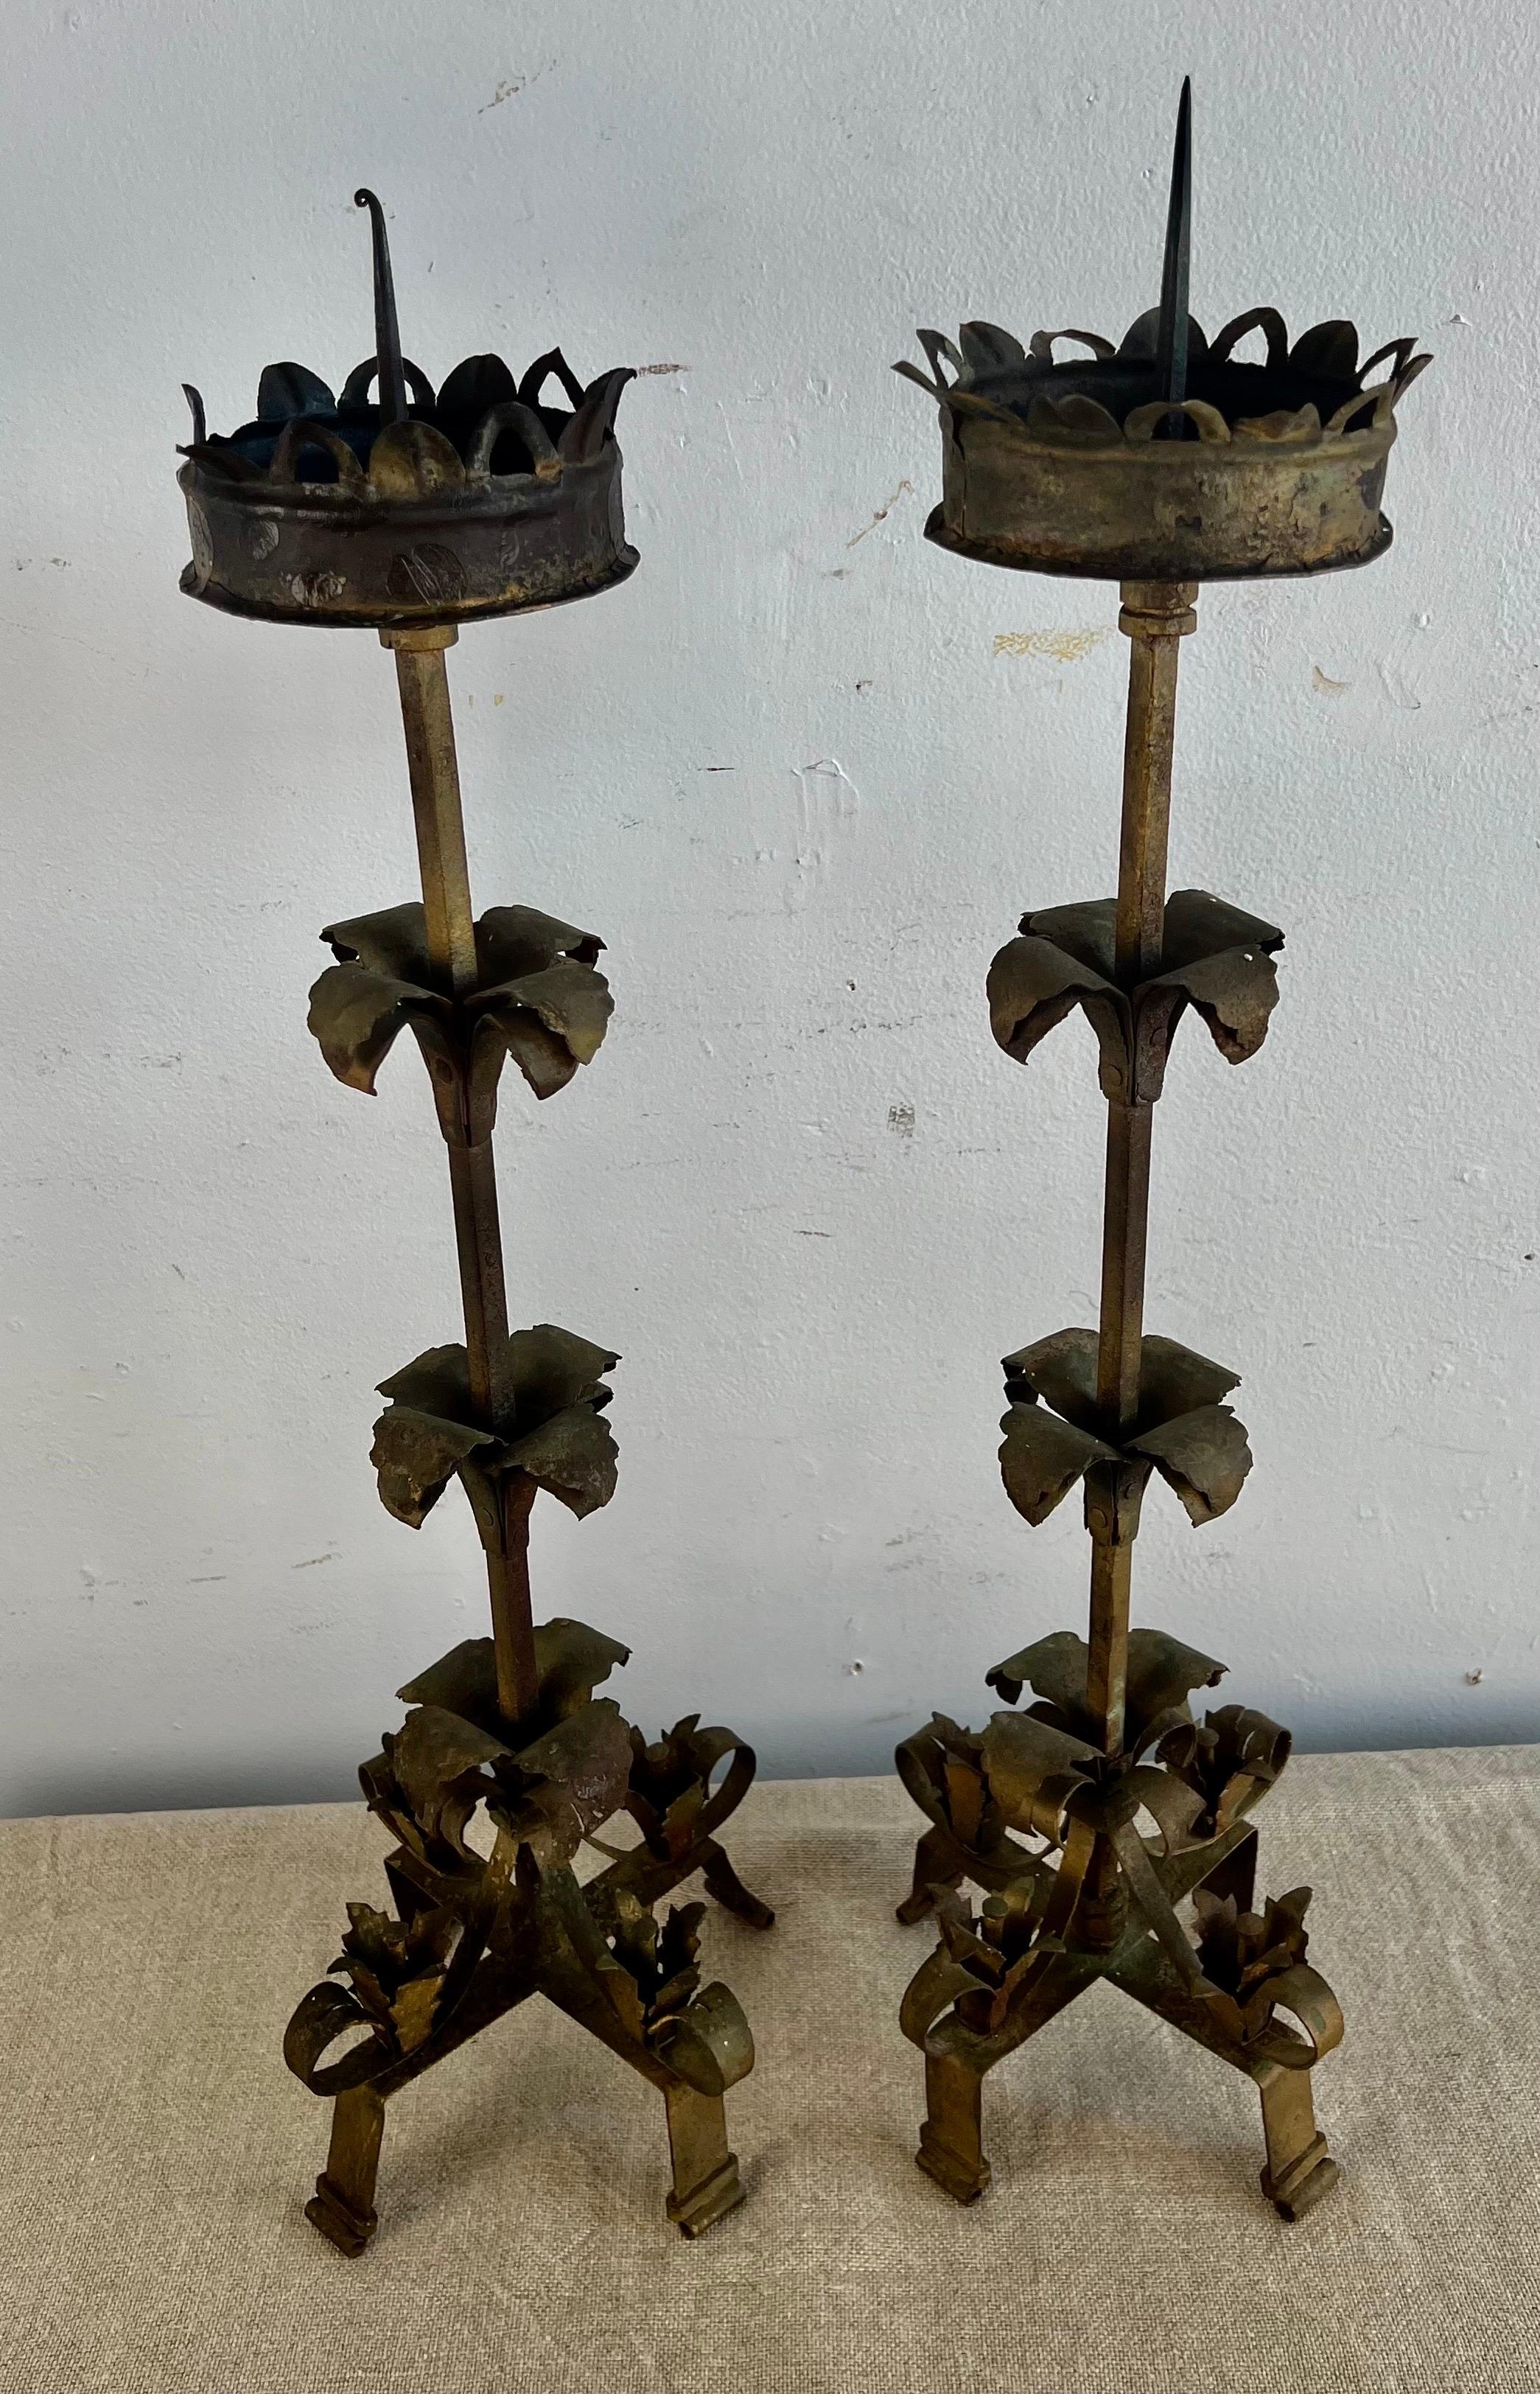 Pair of 19th century Spanish hand wrought iron candlesticks. The candlesticks are beautifully detailed with scrolls, leaves and flowers that have developed a great patina over the years.